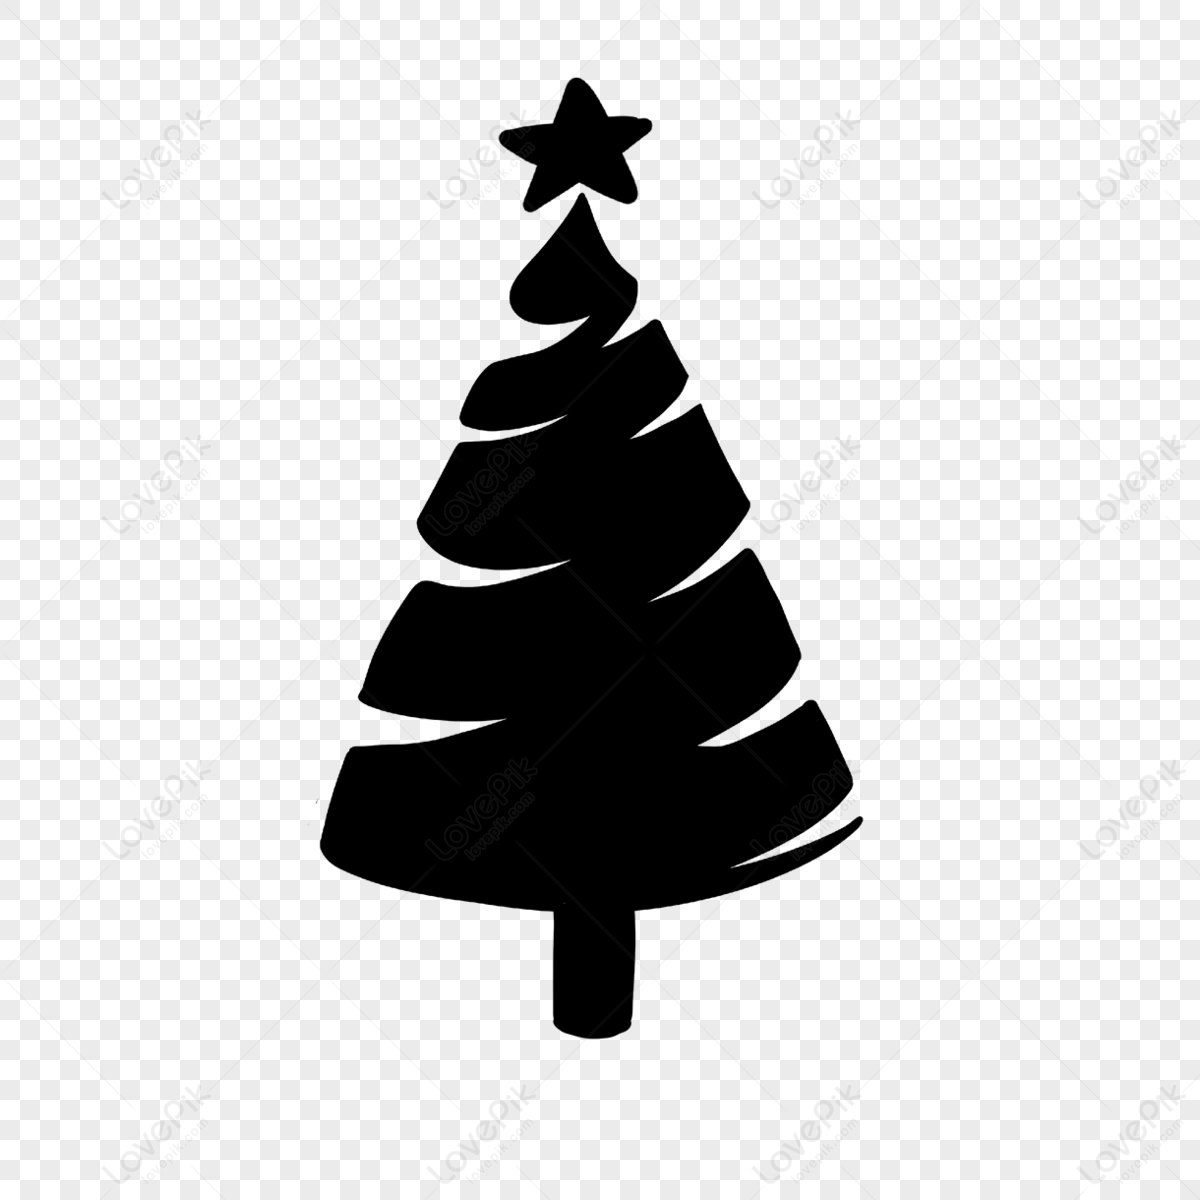 Thick ribbon stars christmas tree silhouette,silk sliding,thick trees png transparent background